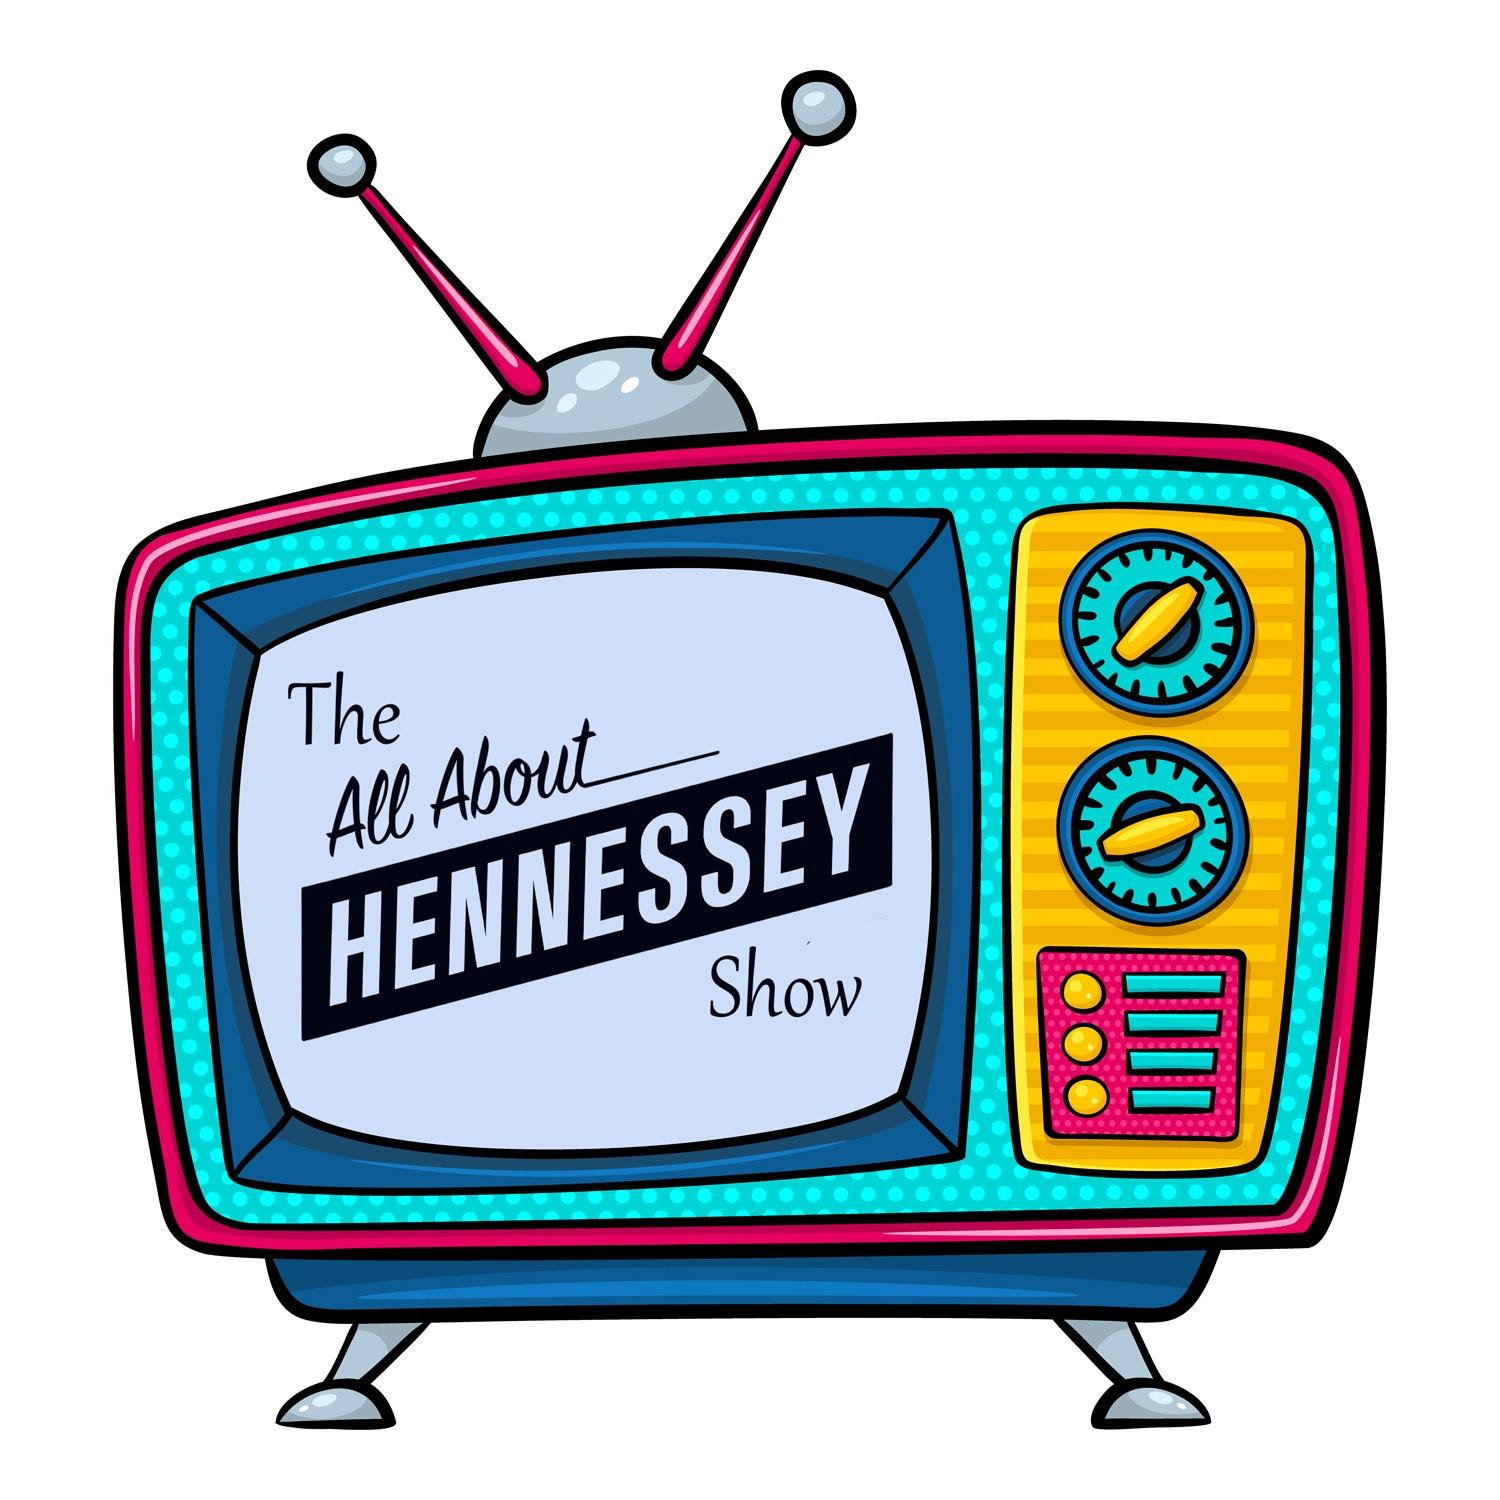 The All About Hennessey Show